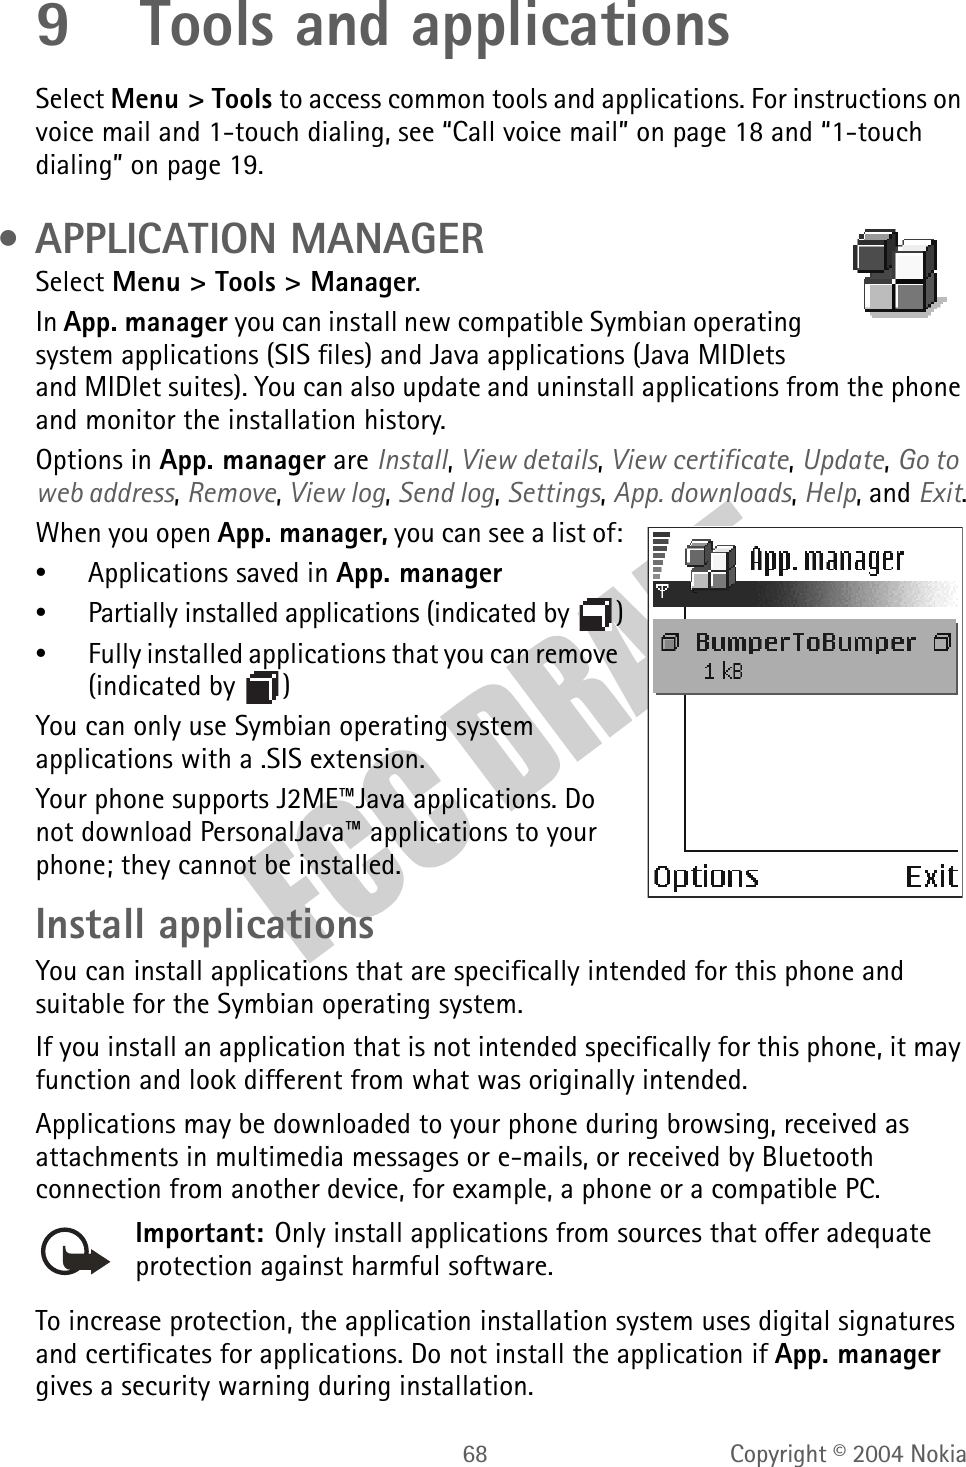 68 Copyright © 2004 Nokia9 Tools and applicationsSelect Menu &gt; Tools to access common tools and applications. For instructions on voice mail and 1-touch dialing, see “Call voice mail” on page 18 and “1-touch dialing” on page 19. • APPLICATION MANAGERSelect Menu &gt; Tools &gt; Manager.In App. manager you can install new compatible Symbian operating system applications (SIS files) and Java applications (Java MIDlets and MIDlet suites). You can also update and uninstall applications from the phone and monitor the installation history.Options in App. manager are Install, View details, View certificate, Update, Go to web address, Remove, View log, Send log, Settings, App. downloads, Help, and Exit.When you open App. manager, you can see a list of:•Applications saved in App. manager•Partially installed applications (indicated by  )•Fully installed applications that you can remove (indicated by  )You can only use Symbian operating system applications with a .SIS extension.Your phone supports J2ME™Java applications. Do not download PersonalJava™ applications to your phone; they cannot be installed.Install applicationsYou can install applications that are specifically intended for this phone and suitable for the Symbian operating system.If you install an application that is not intended specifically for this phone, it may function and look different from what was originally intended.Applications may be downloaded to your phone during browsing, received as attachments in multimedia messages or e-mails, or received by Bluetooth connection from another device, for example, a phone or a compatible PC.Important: Only install applications from sources that offer adequate protection against harmful software.To increase protection, the application installation system uses digital signatures and certificates for applications. Do not install the application if App. manager gives a security warning during installation.